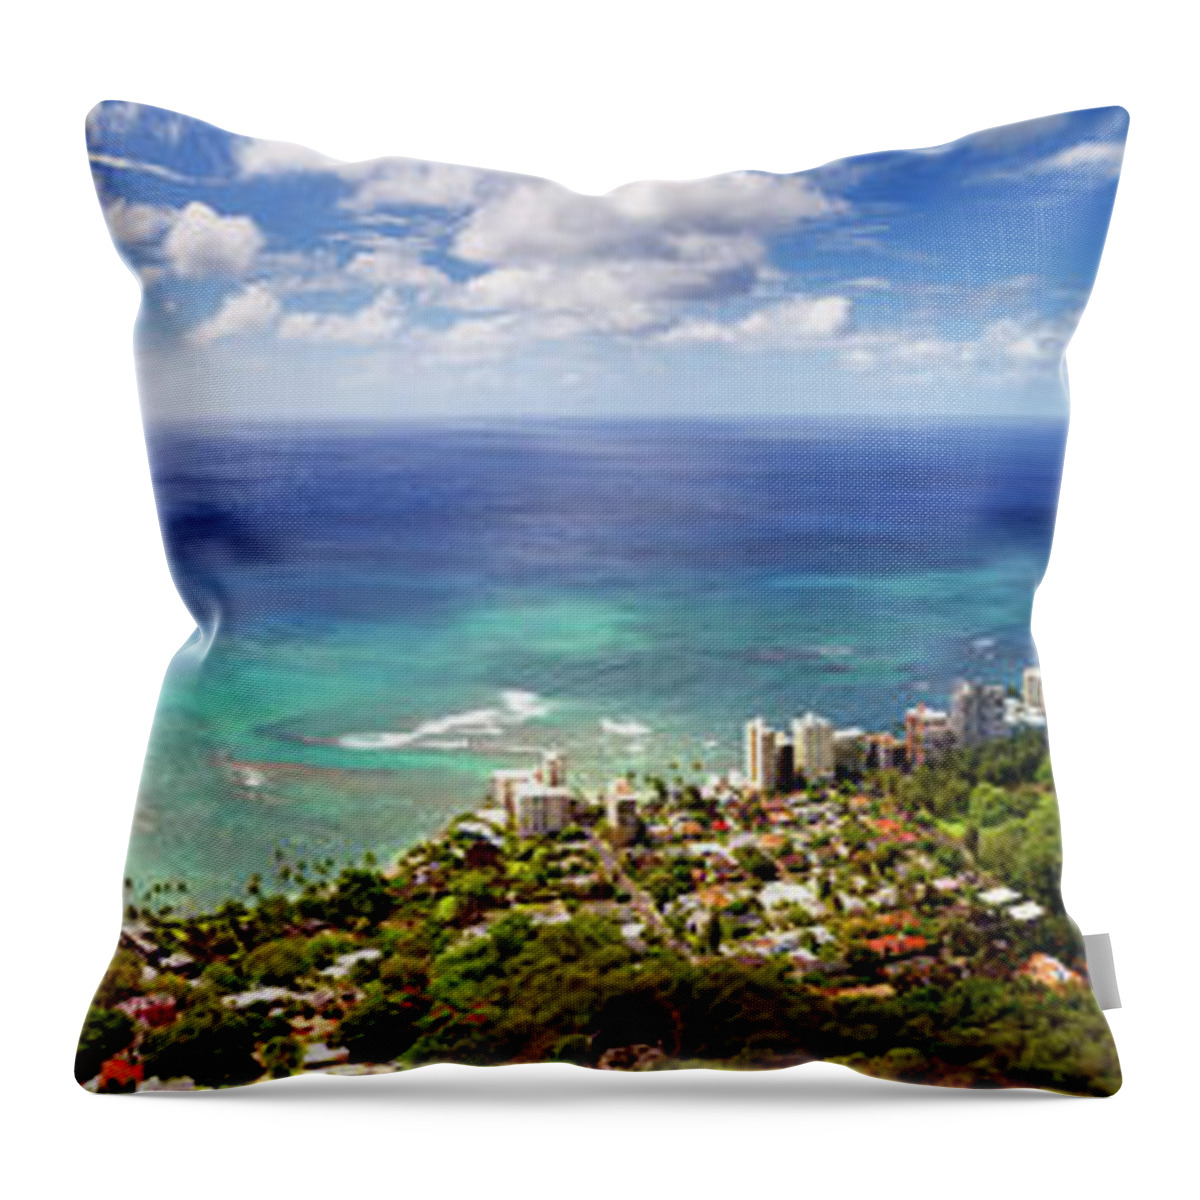 Tranquility Throw Pillow featuring the photograph Panorama Of Waikiki Beach by Anna Gorin